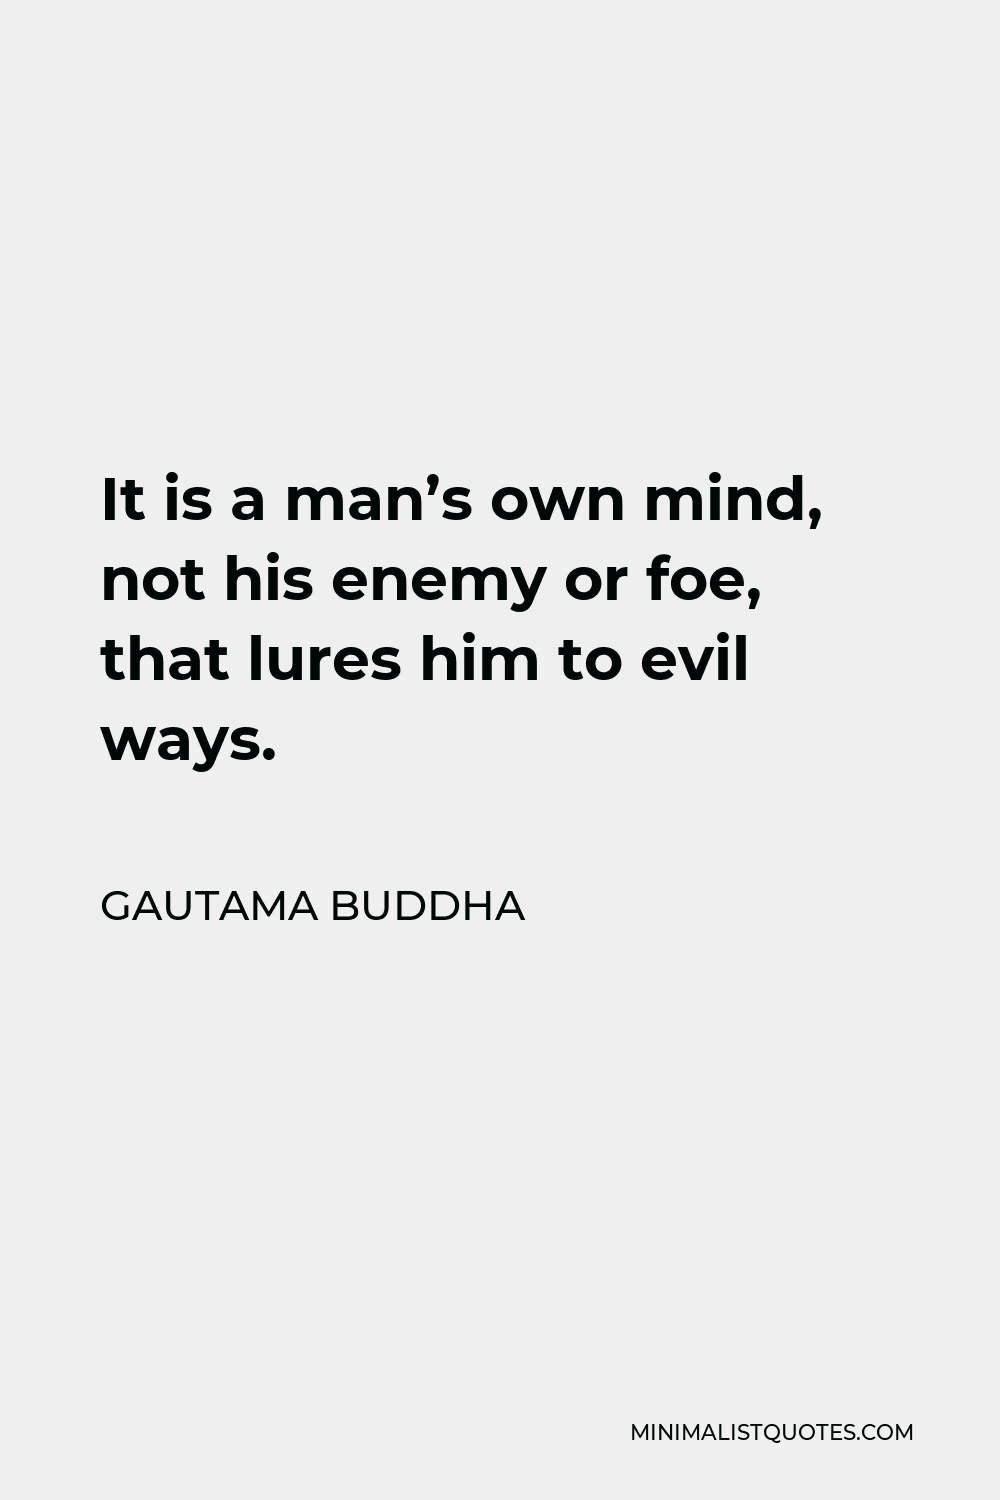 Gautama Buddha Quote - It is a man’s own mind, not his enemy or foe, that lures him to evil ways.